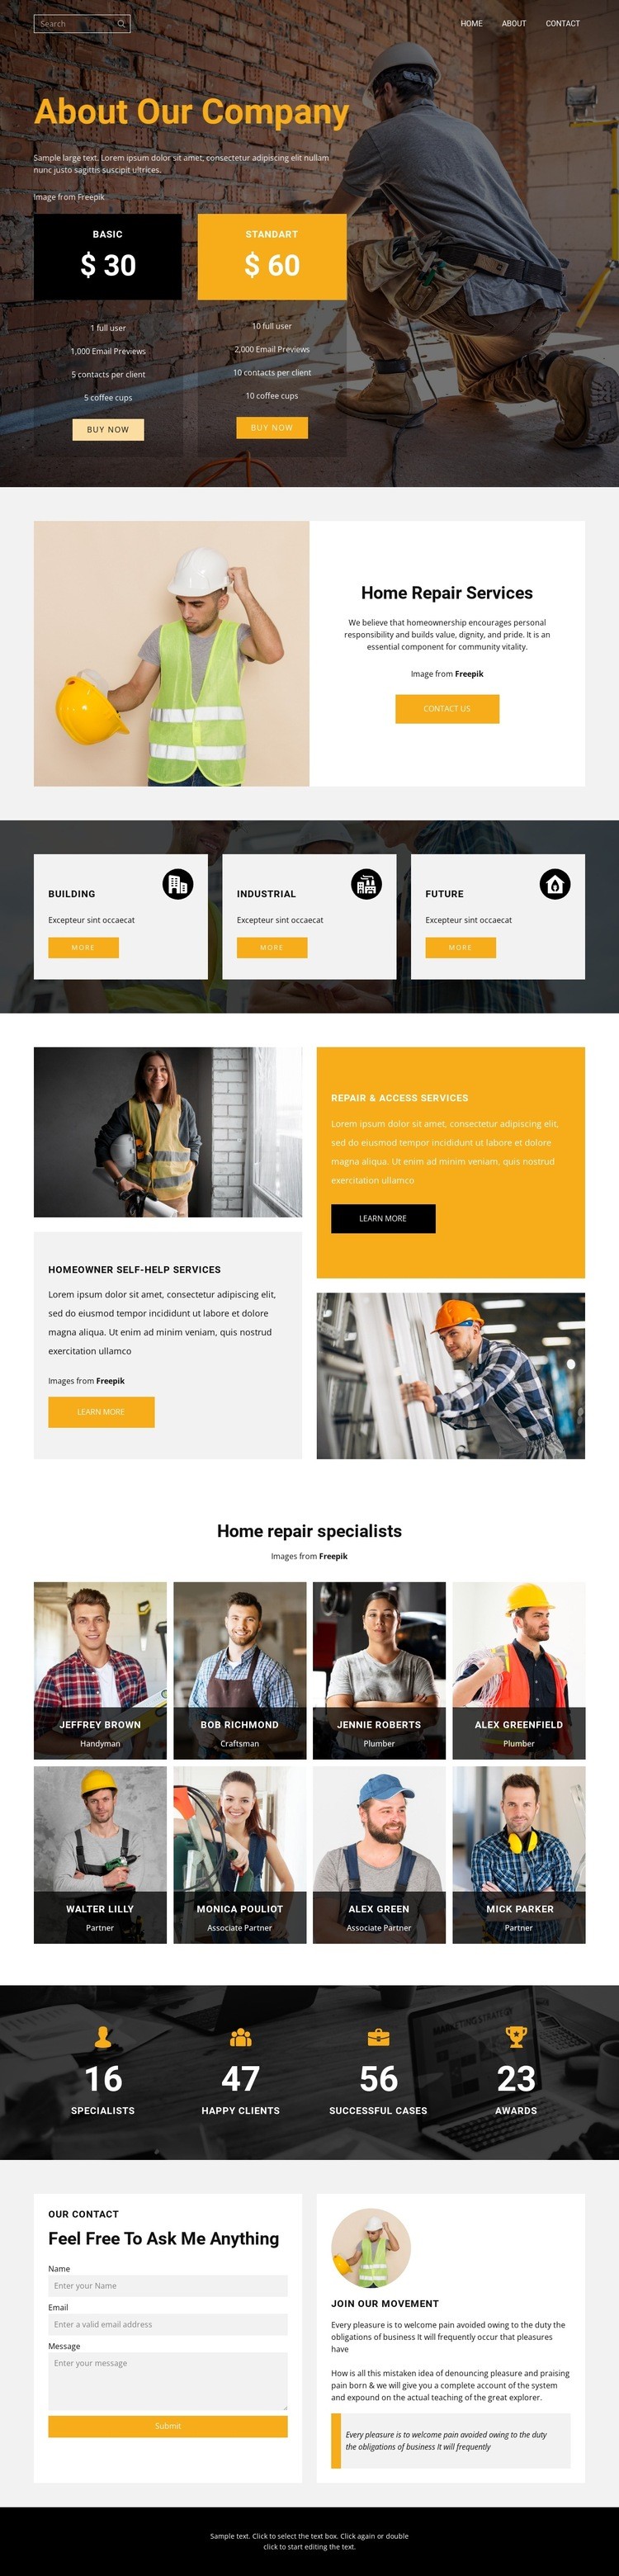 We will build a better home Homepage Design